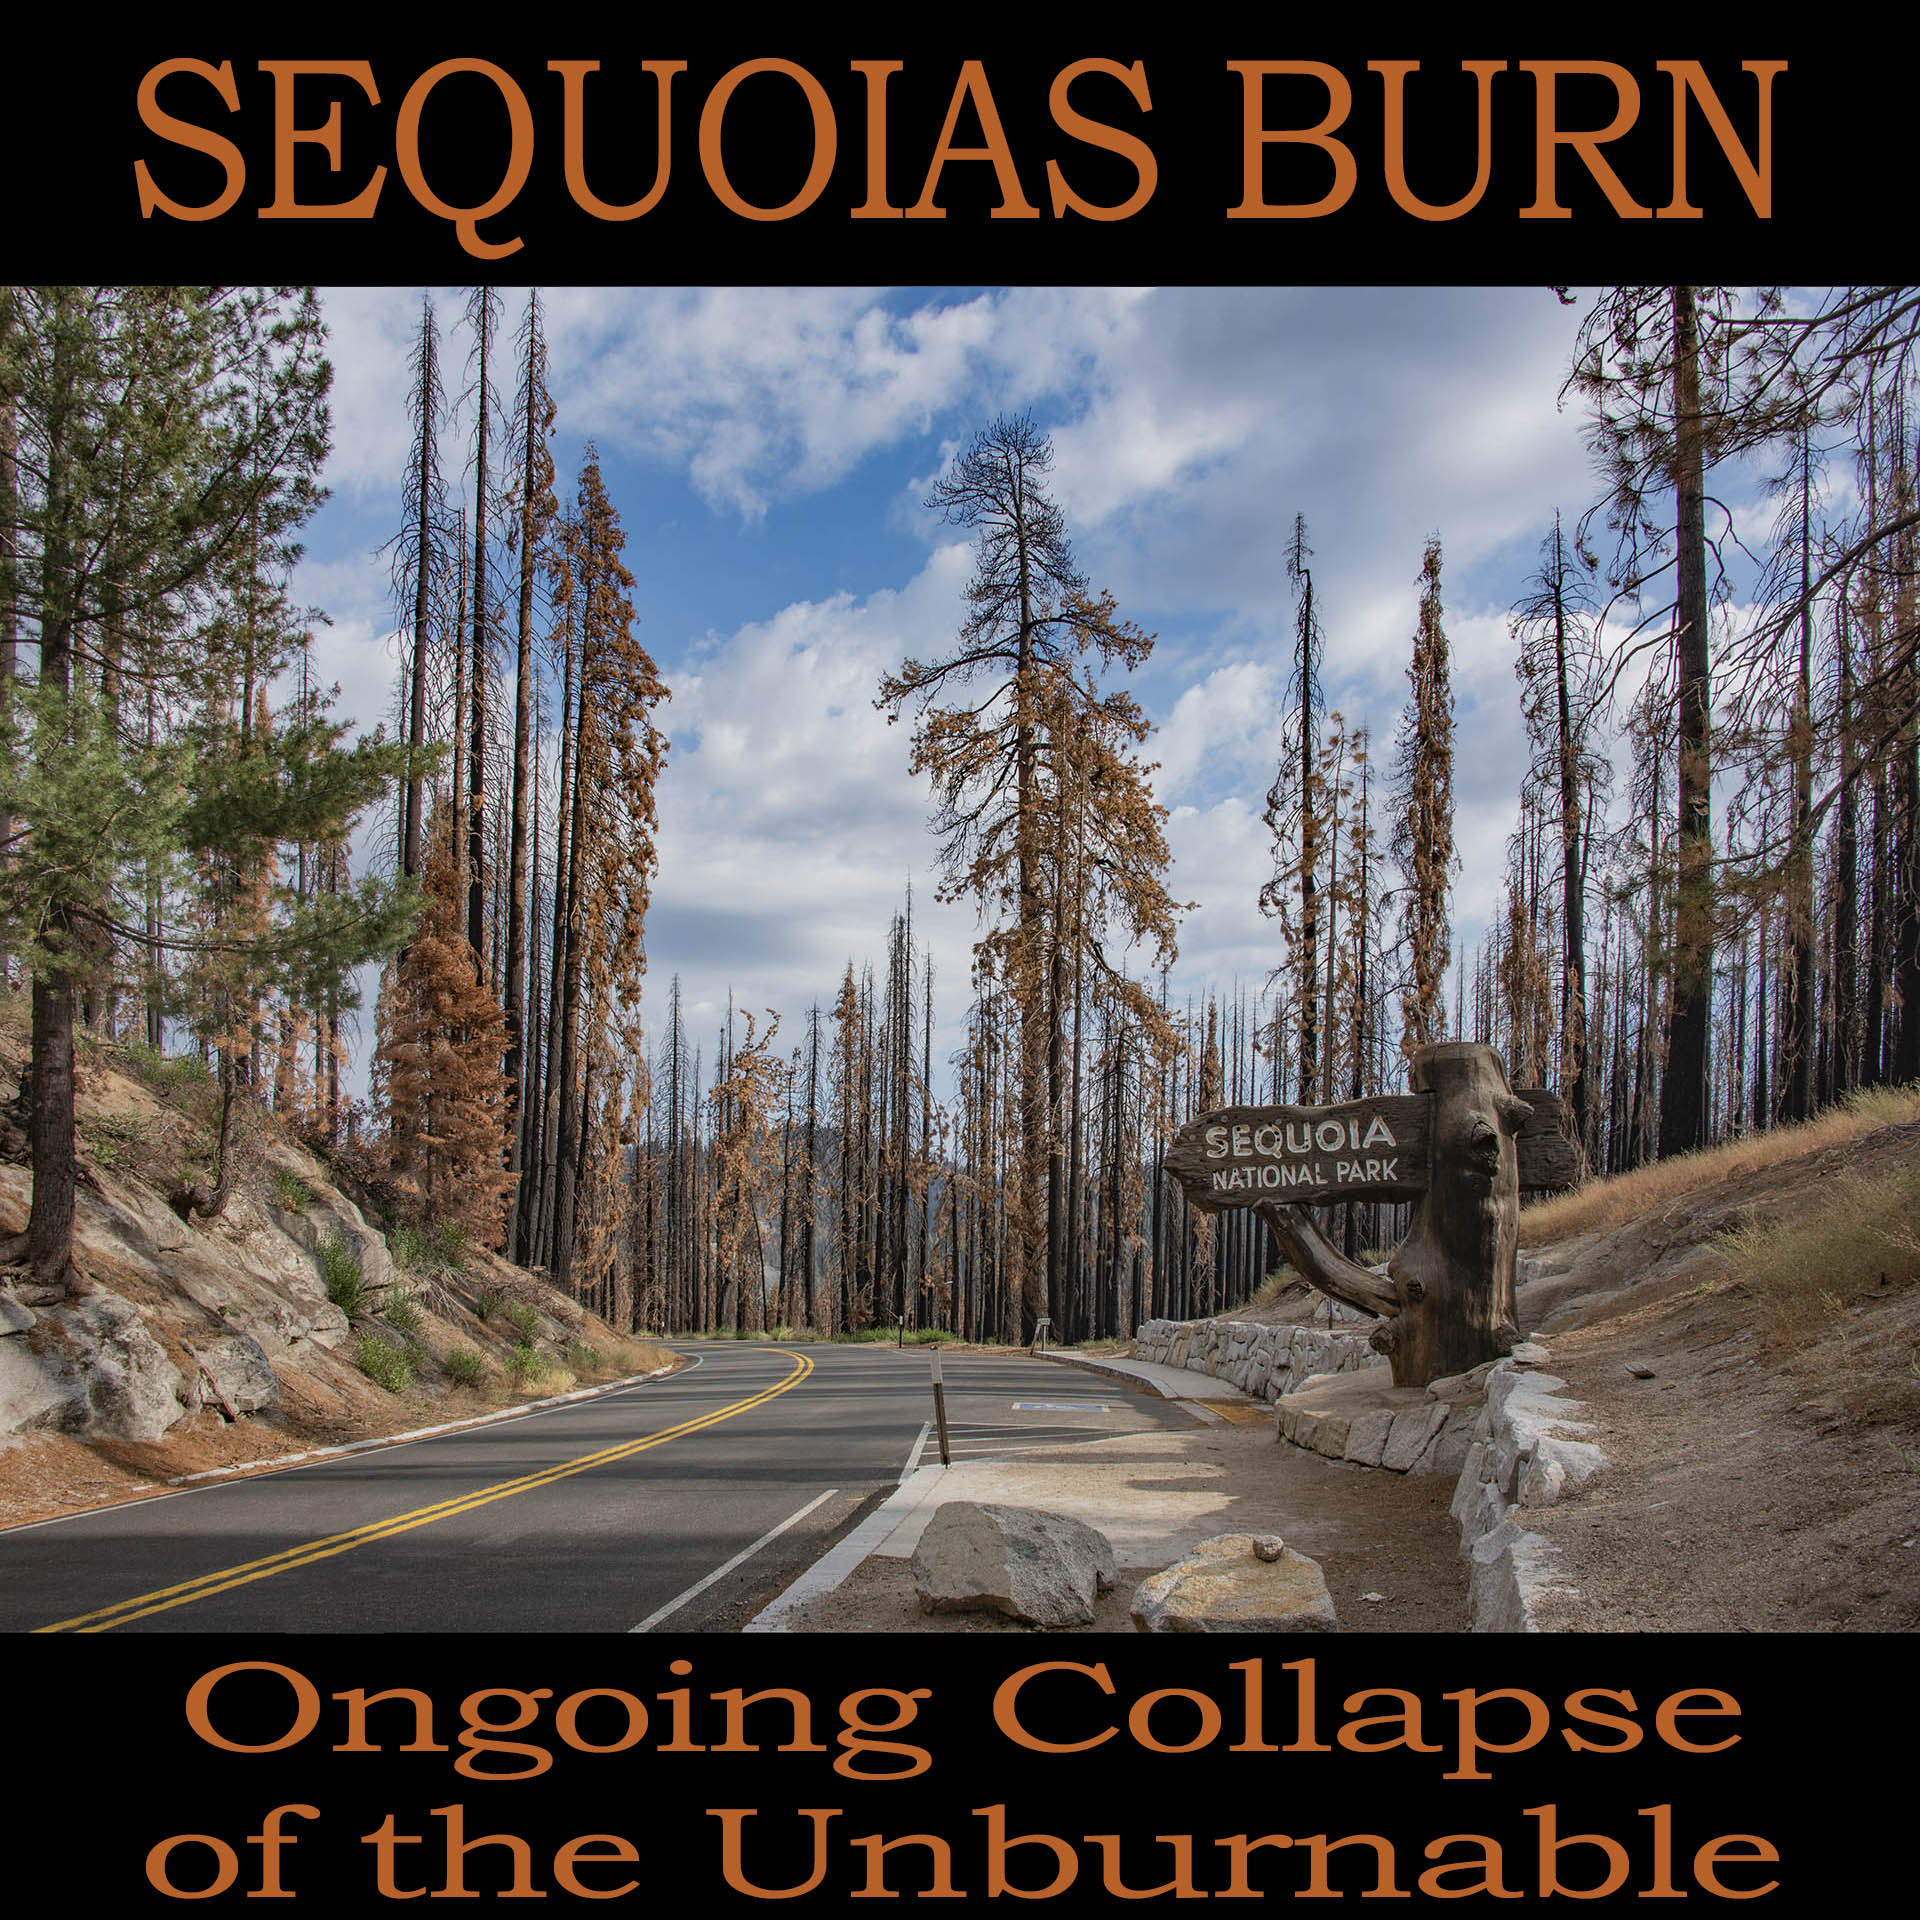 Sequoias Burn: Ongoing Collapse of the Unburnable